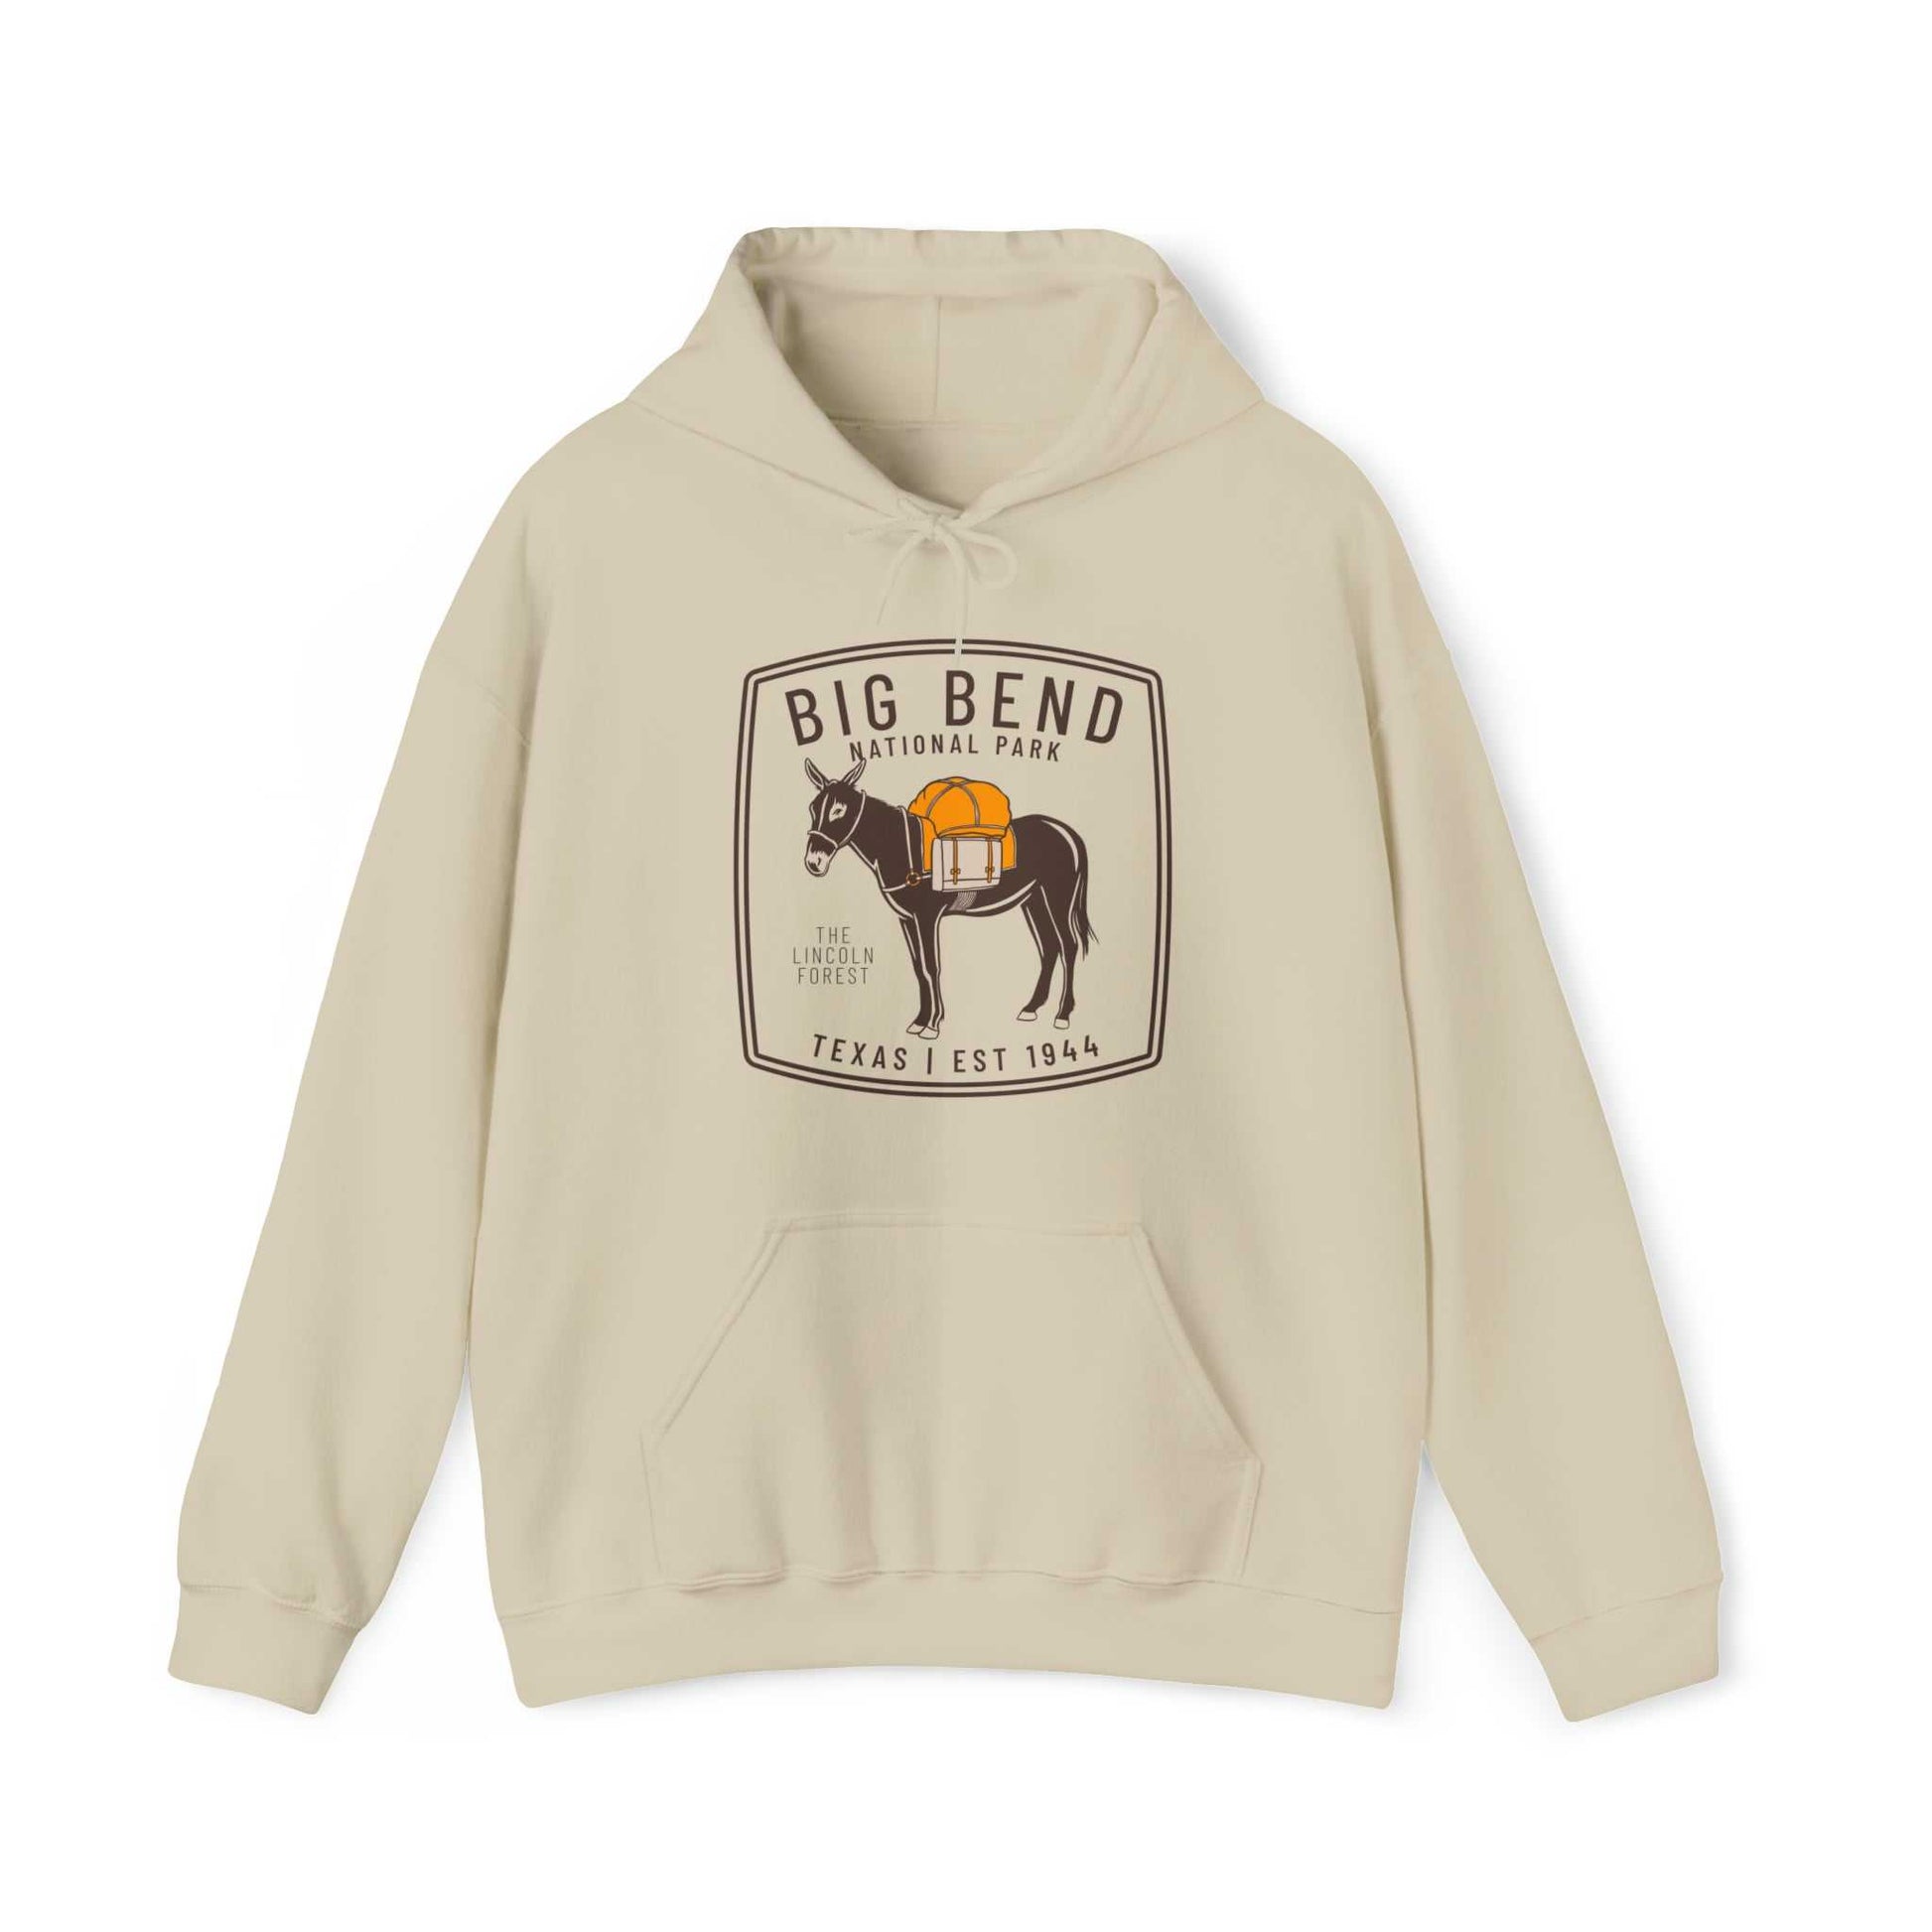 Big Bend National Park SweatshirtBring home your favorite fun little trail buddy from Big Bend National Park of Texas into your wardrobe with this cozy and comfy crewneck sweatshirt or hoodie.
Detai